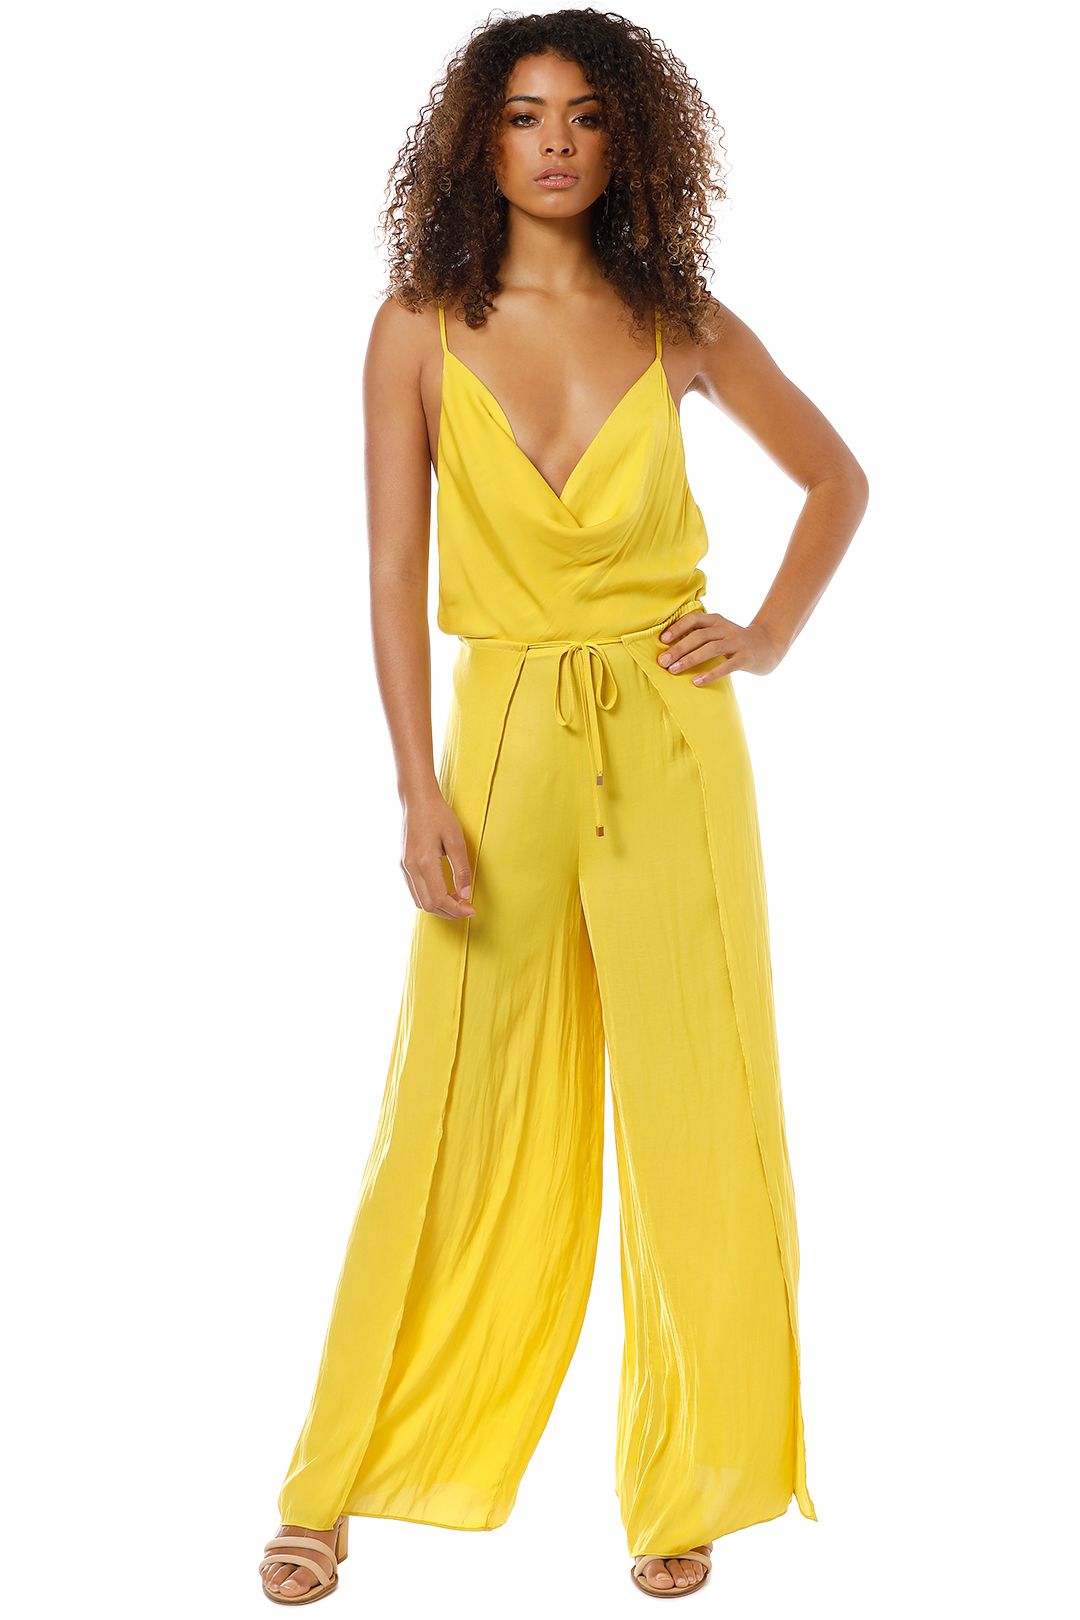 Sheike - Kiss and Tell Jumpsuit - Yellow Mustard - Front